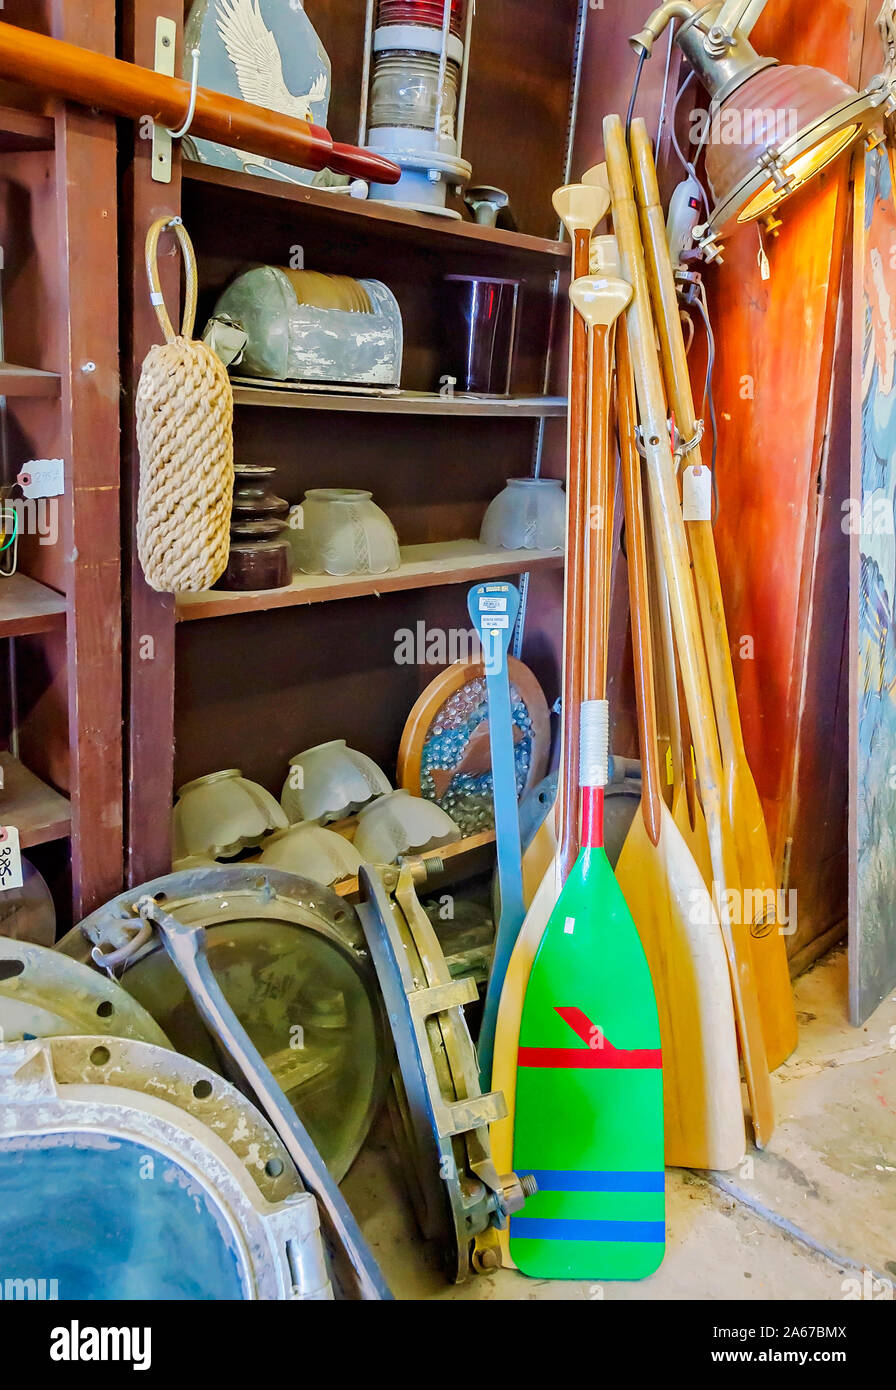 Wooden canoe paddles, nautical souvenirs, and memorabilia are crowded onto shelves, Oct. 6, 2019, in Apalachicola, Florida. Stock Photo